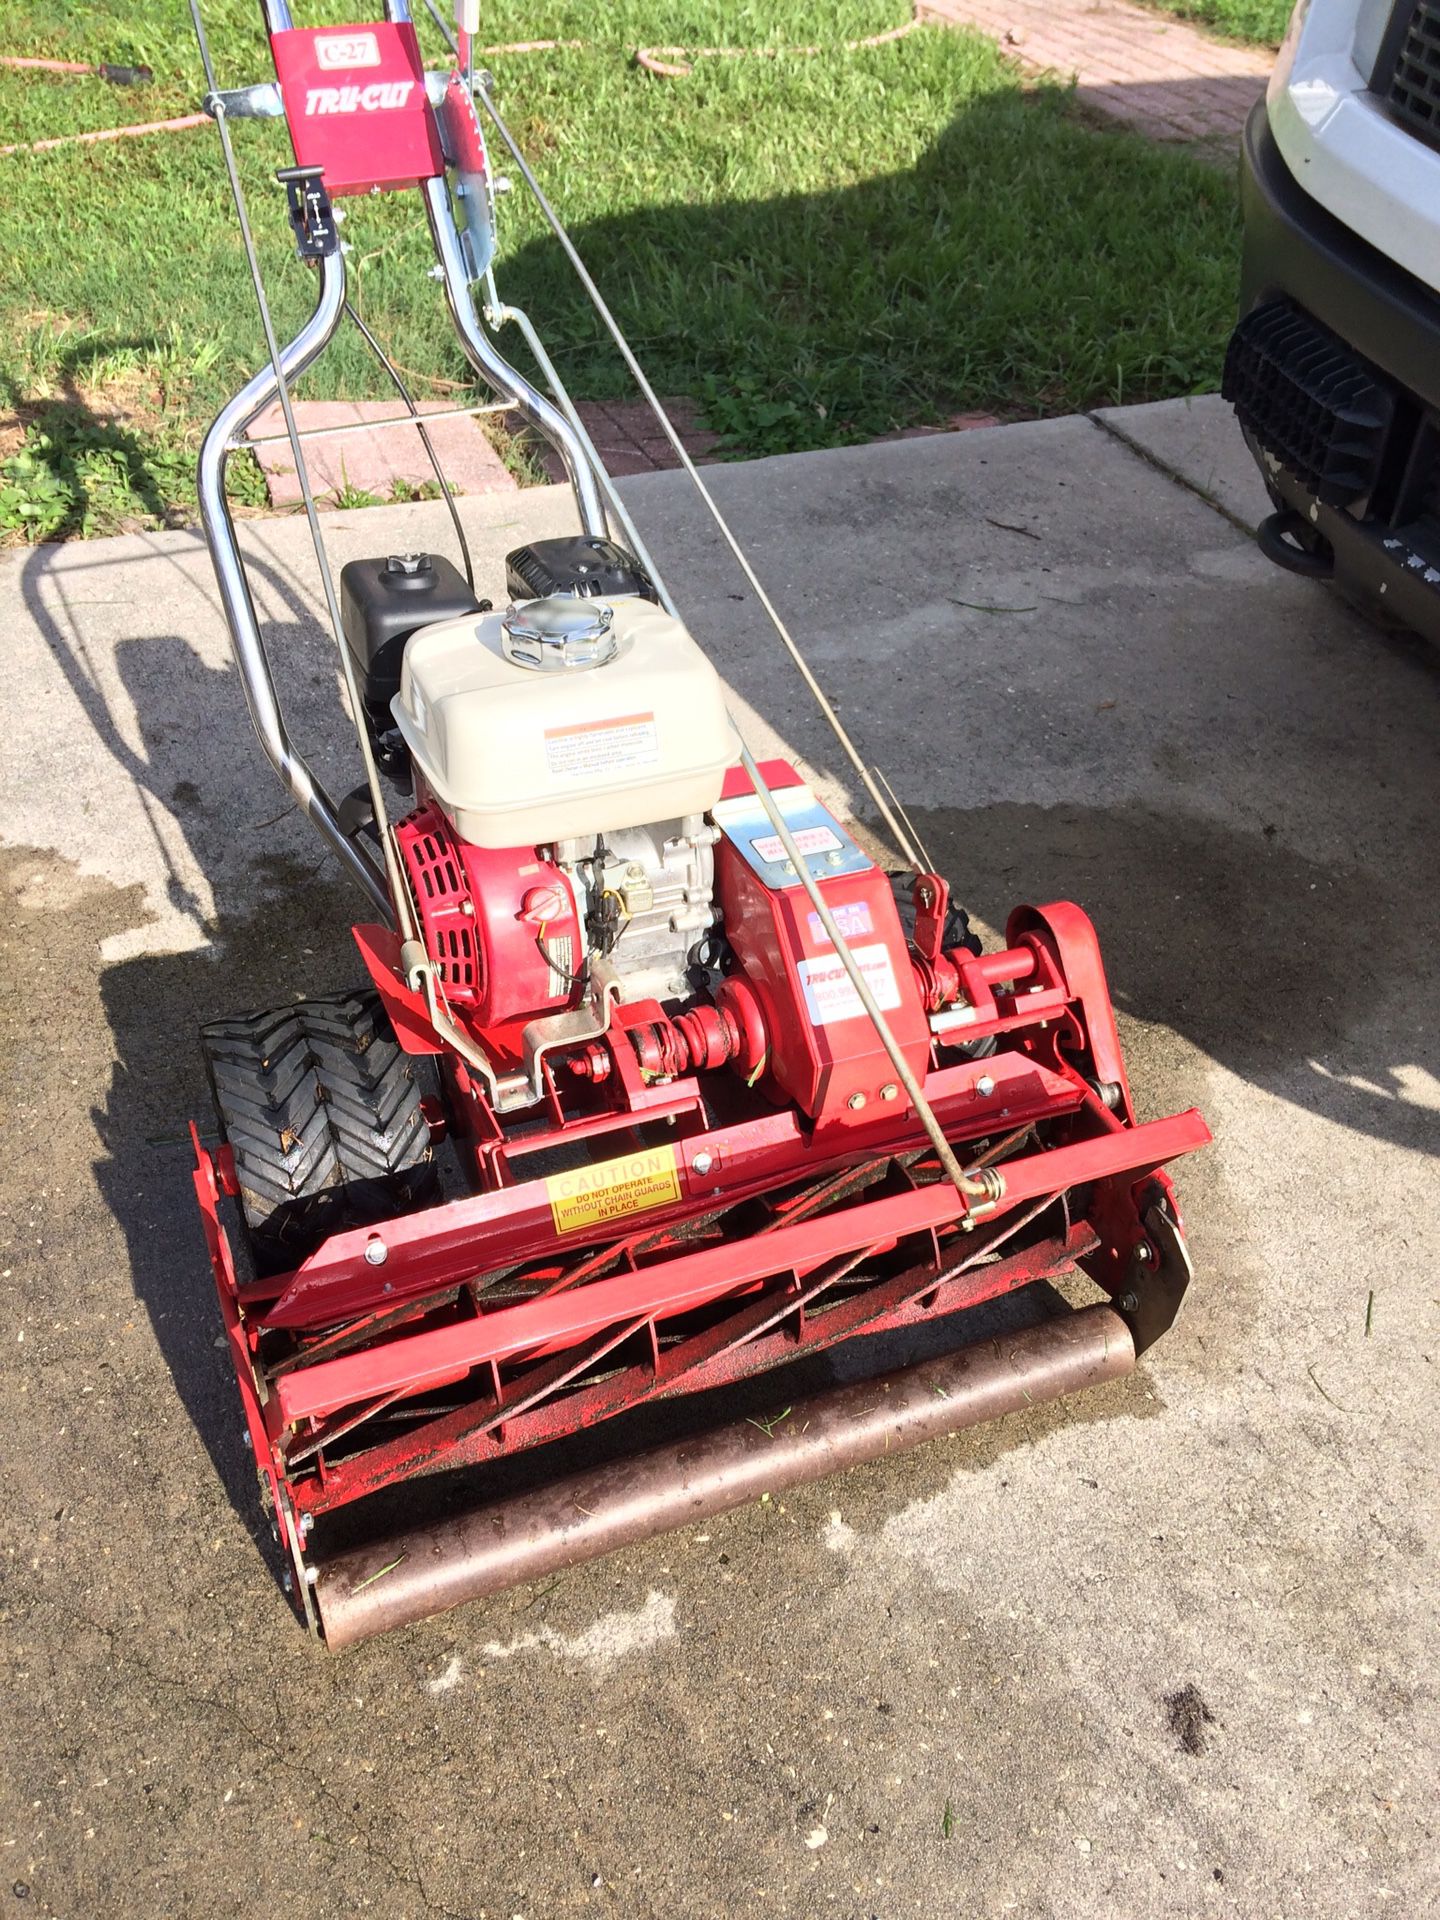 Trucut C27 Commercial reel mower for Sale in Tampa, FL - OfferUp